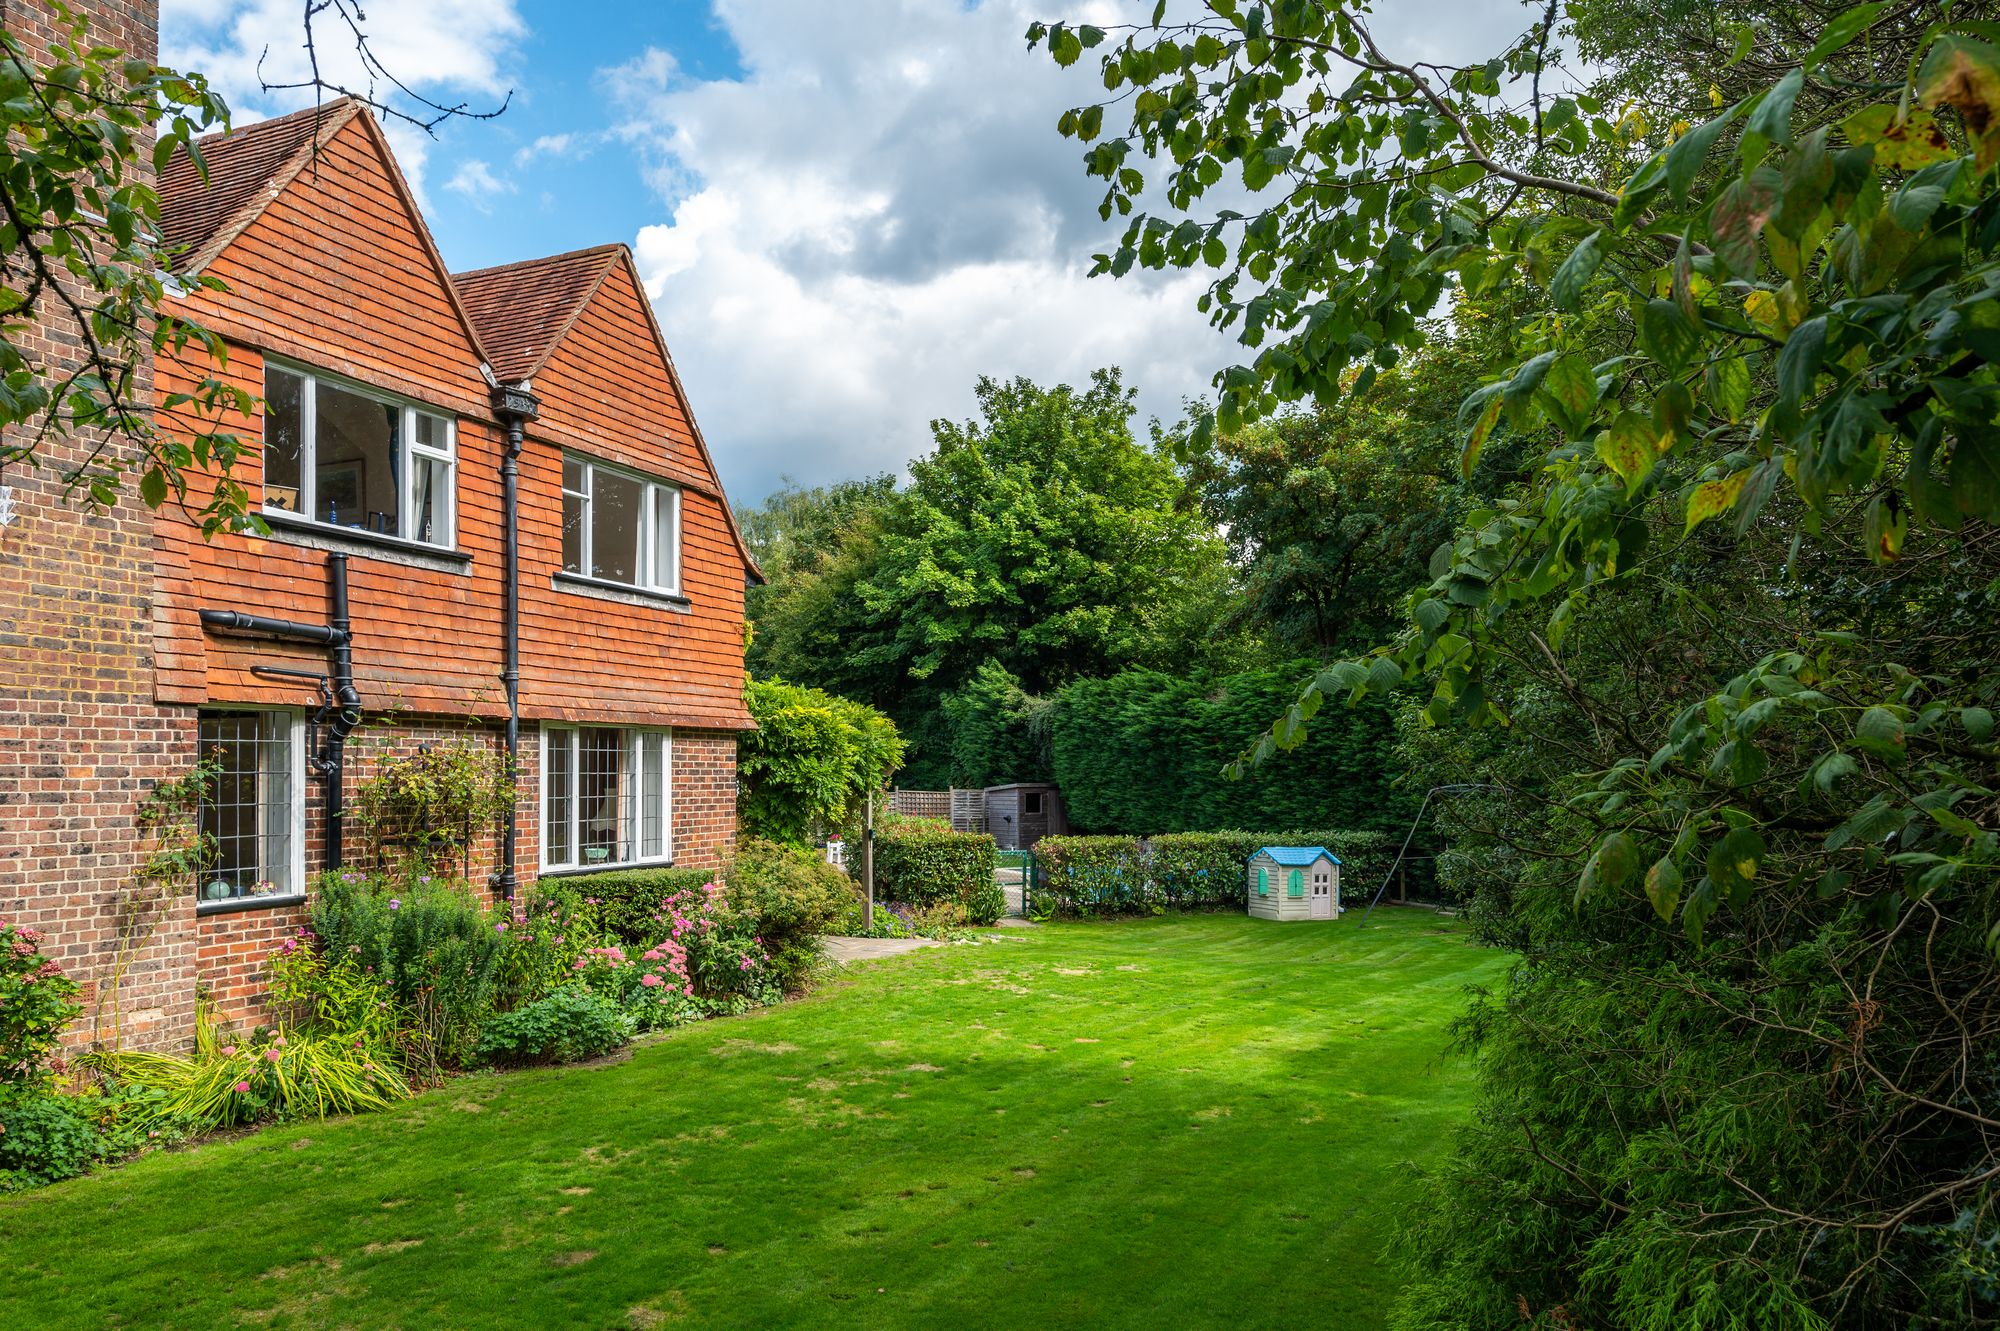 Tanners Lane, Haslemere, GU27 images